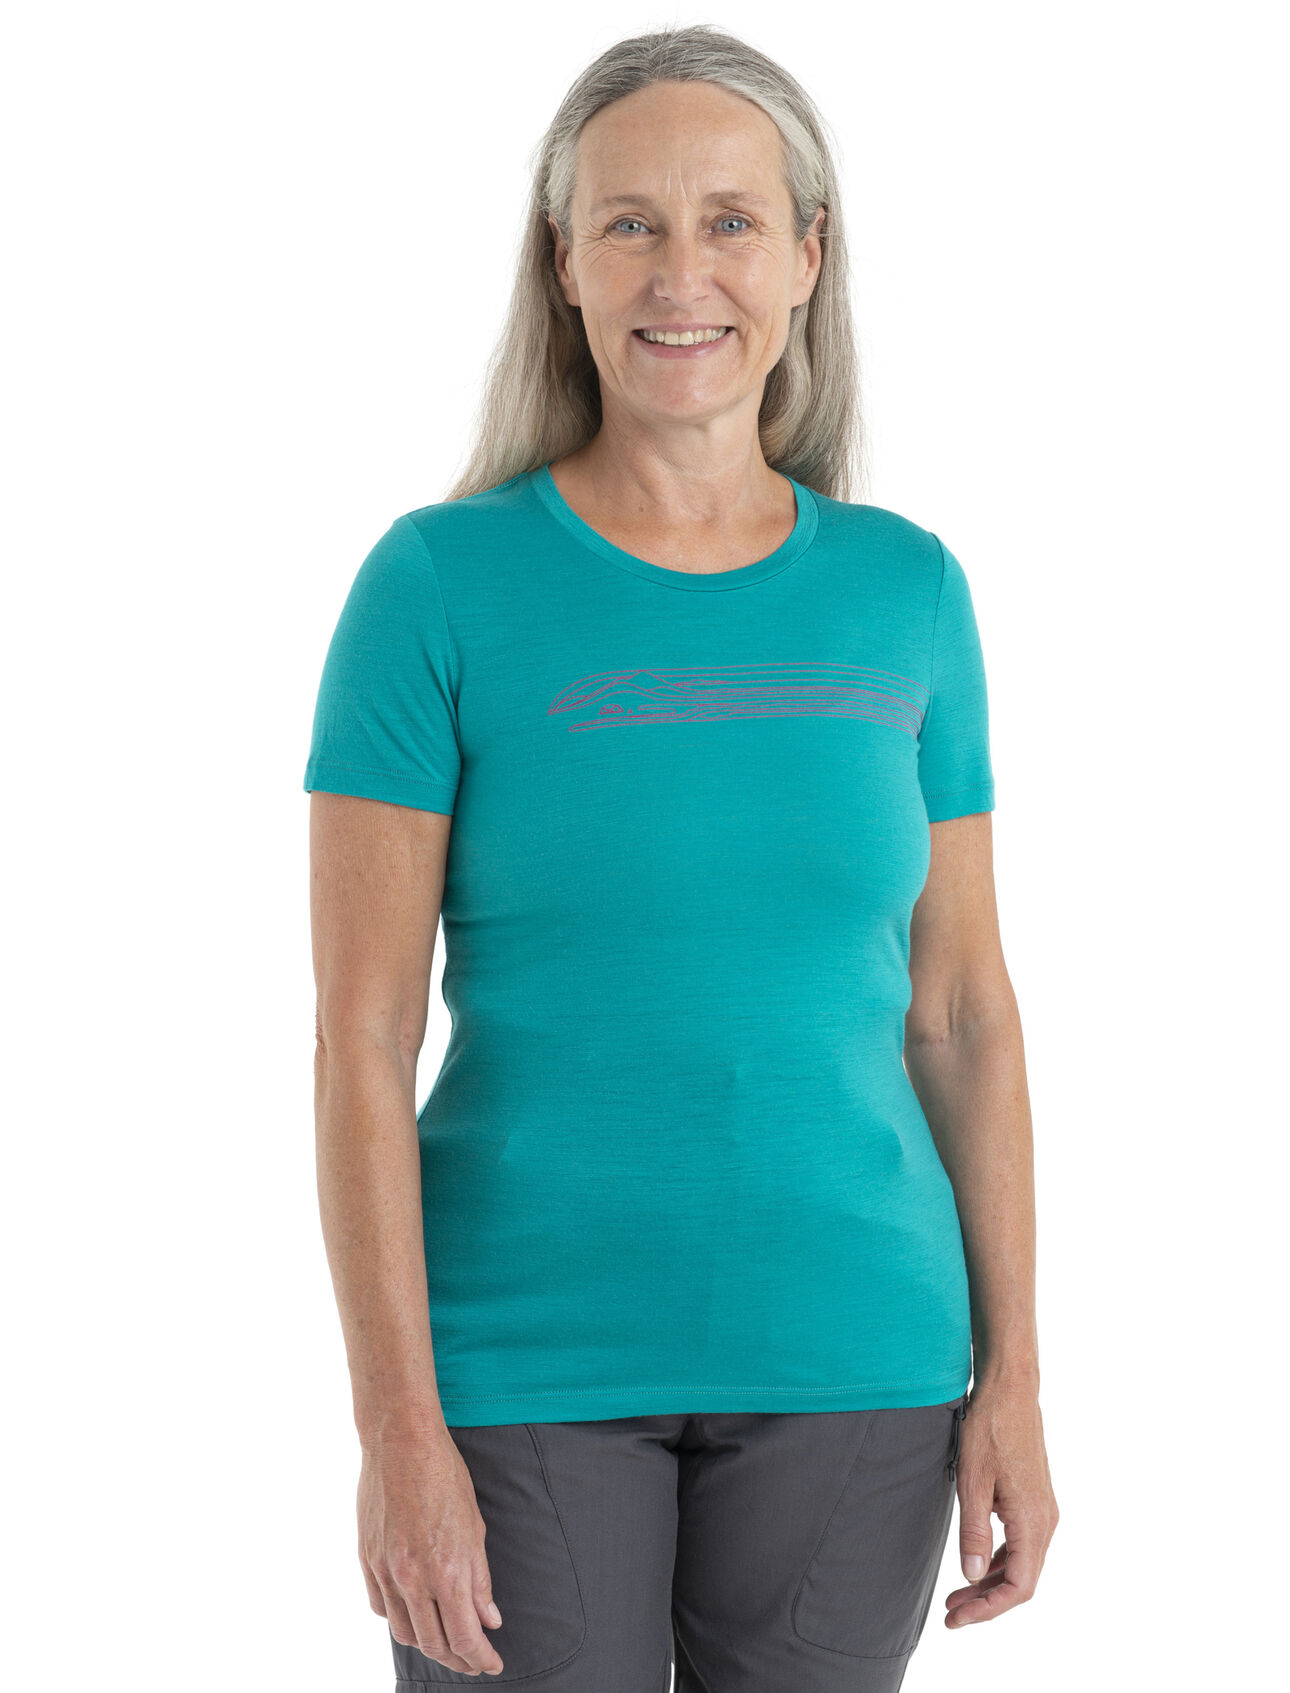 Womens Merino 150 Tech Lite II Short Sleeve T-Shirt Camping Lines Our versatile tech tee that provides comfort, breathability and odour-resistance for any adventure you can think of, the 150 Tech Lite II Short Sleeve Scoop Tee Camping Lines features 100% merino for all-natural performance. The tee's original artwork features a unique line drawing of a picturesque camp scene.